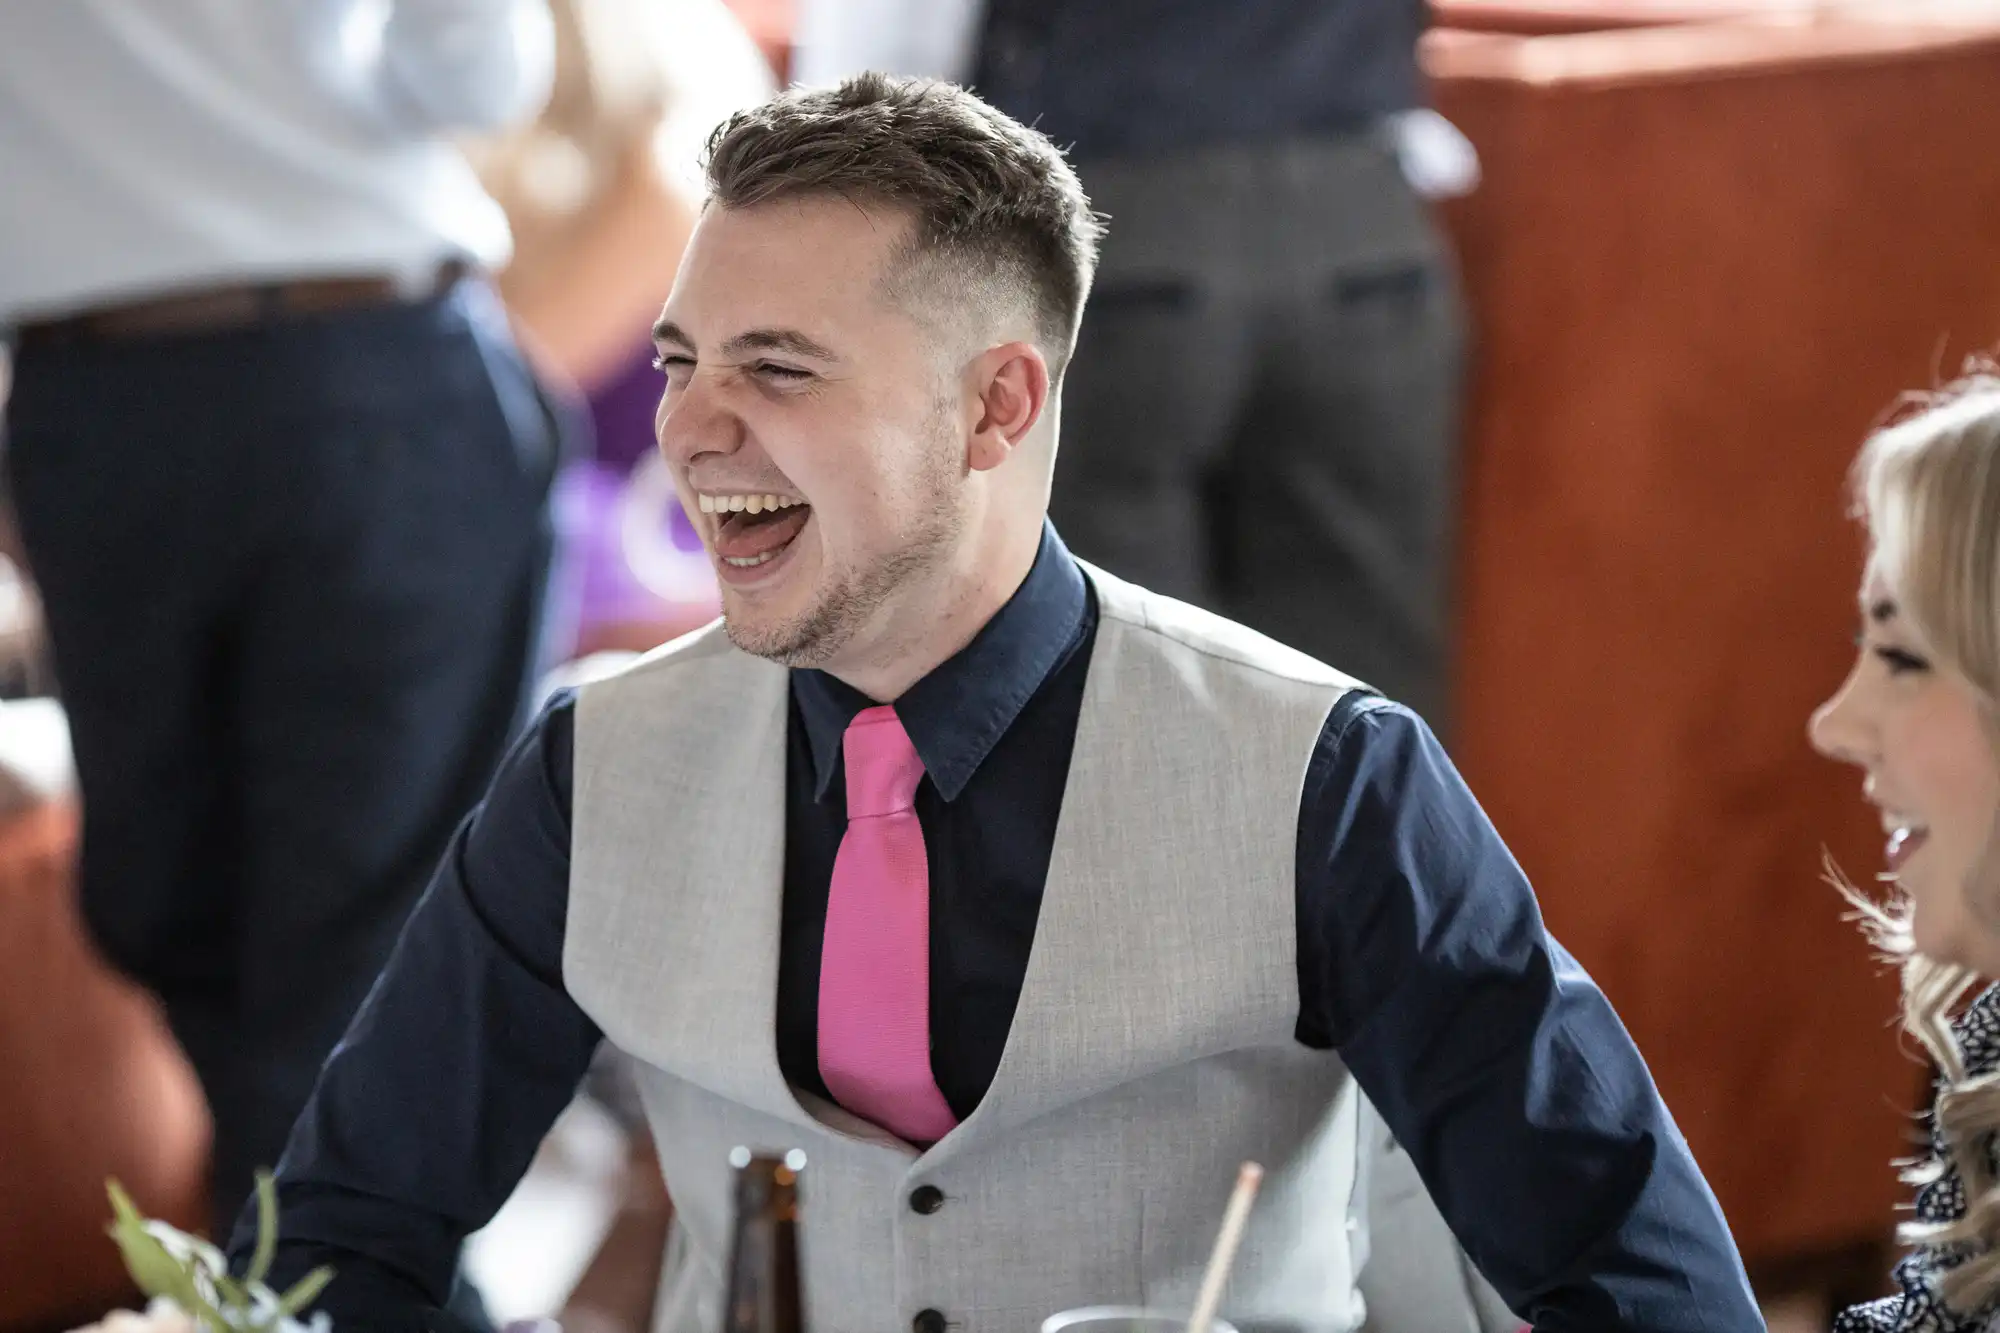 A man in a formal gray vest and pink tie laughing joyfully at a social event, seated at a table with visible beverages.